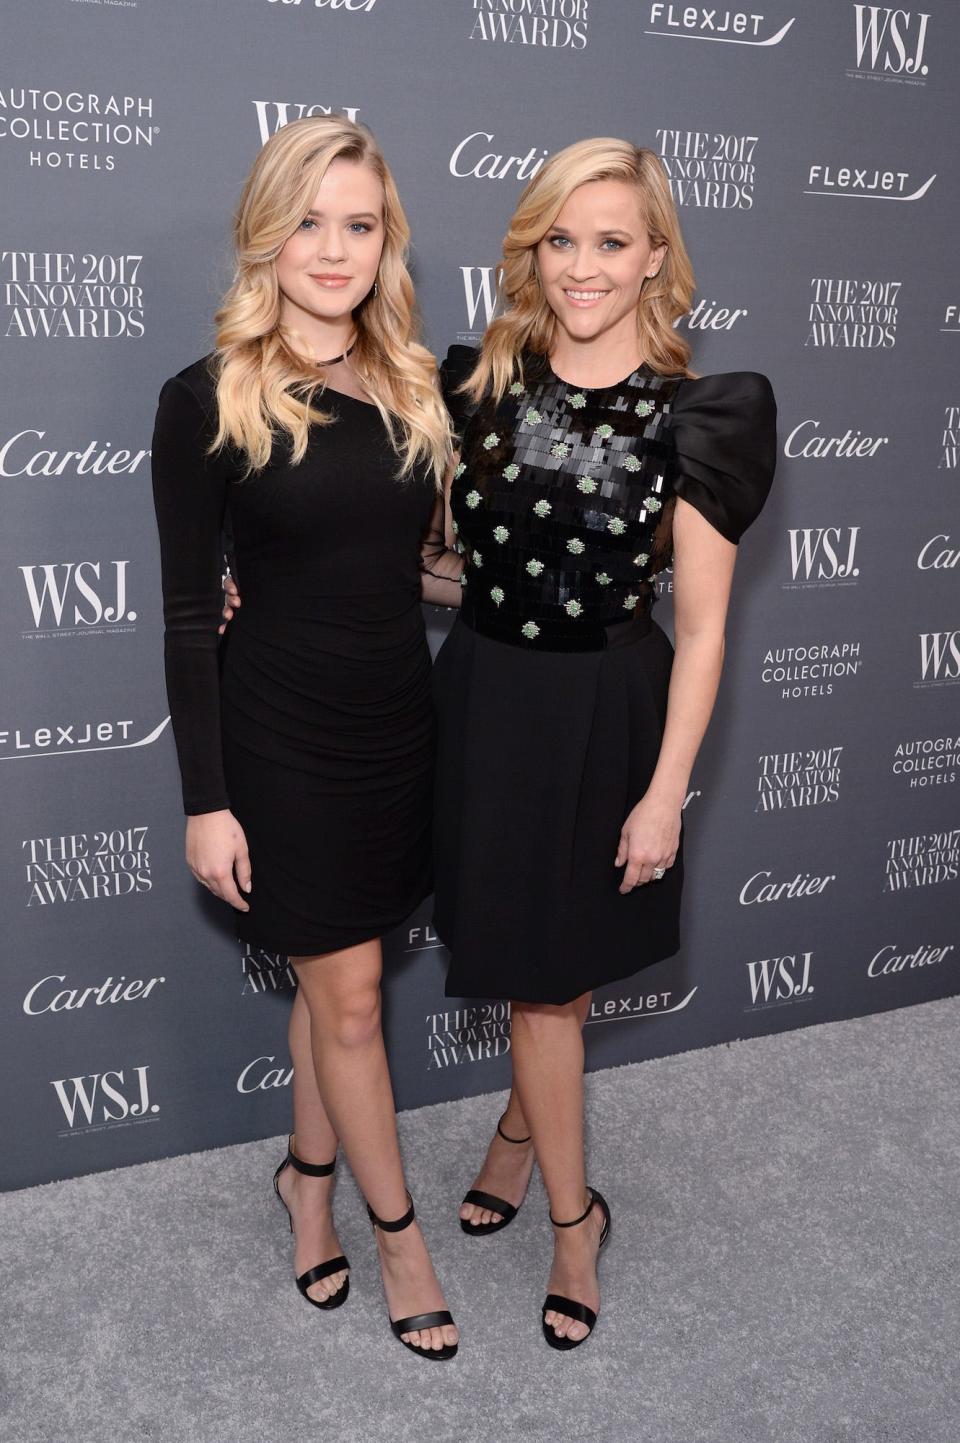 Ava Phillippe and Reese Witherspoon pose together in coordinated outfits on November 1, 2017.